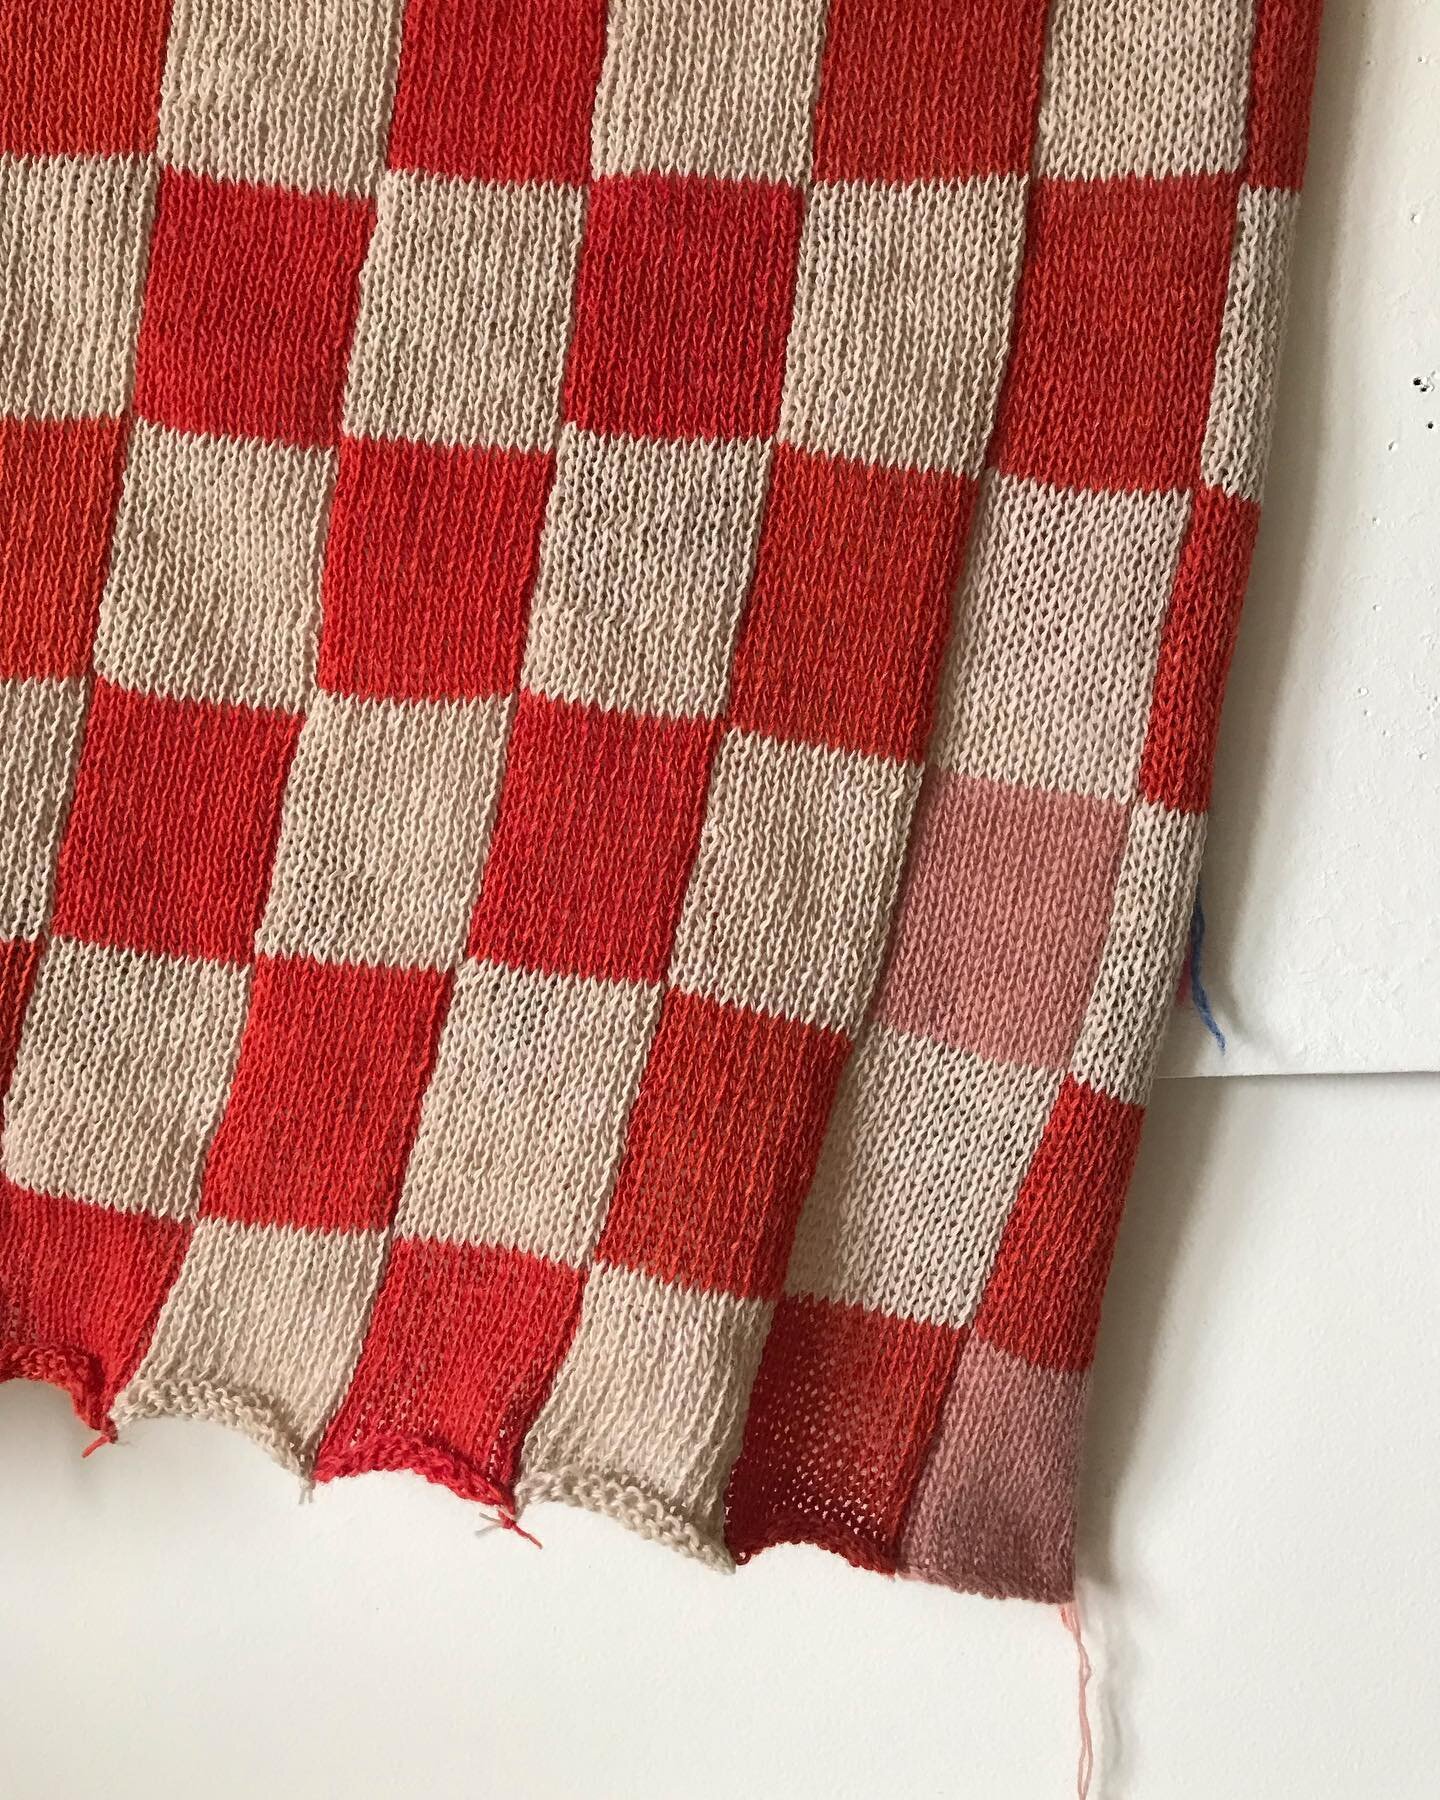 A year ago I knitted this sample and used the very first of my hawthorn dyed wool, shown here as the little pink squares bottom right. After this first photo, it was washed (2nd photo) and the colour changed slightly. I then pinned the sample to a bo